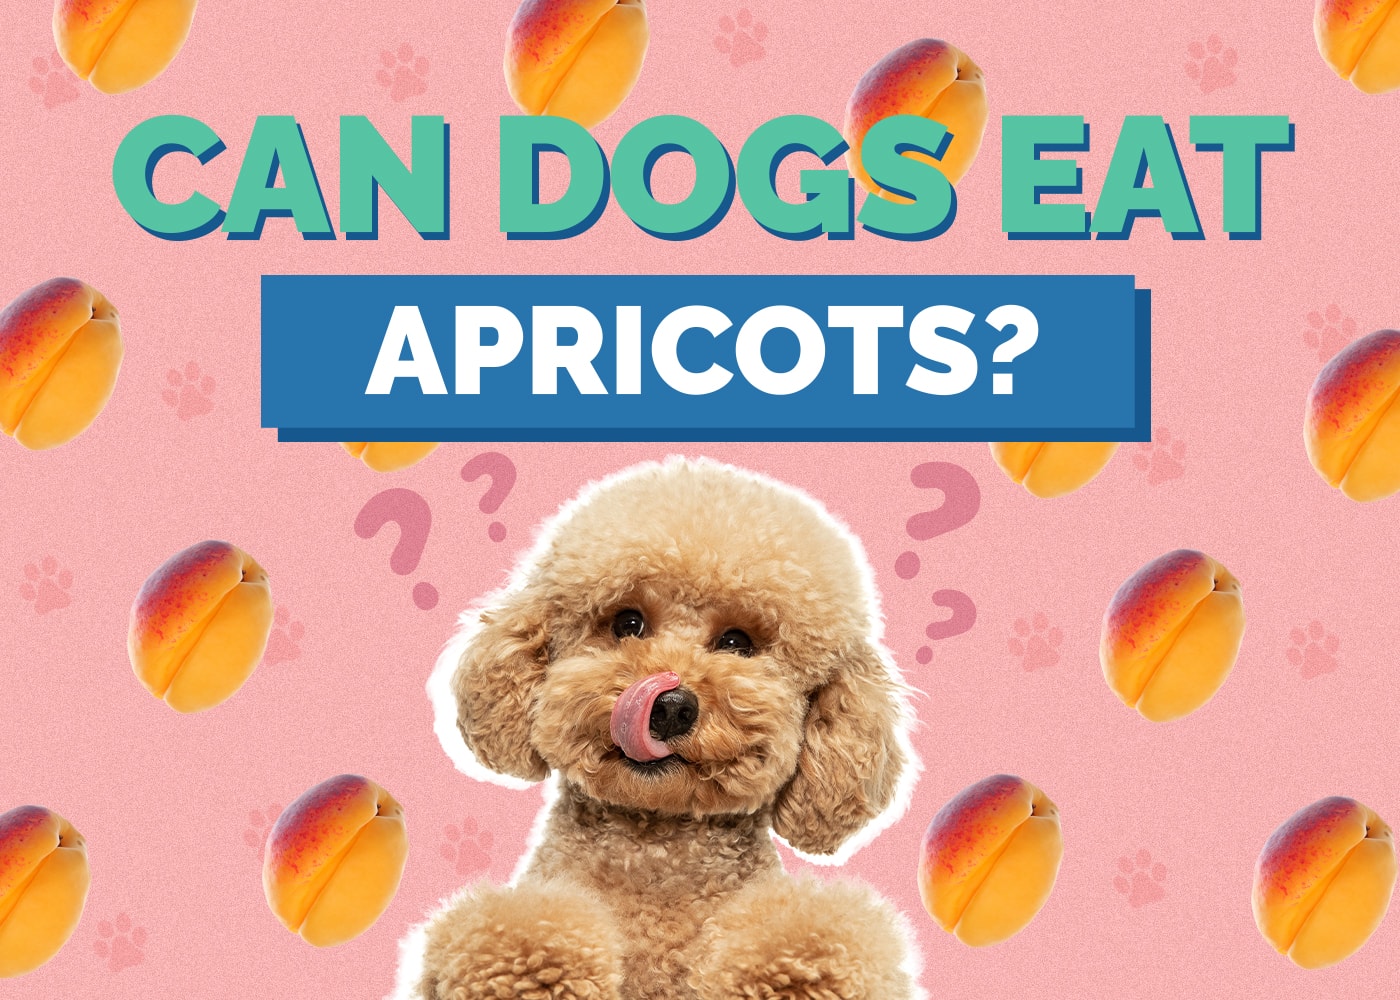 Can Dog Eat apricots